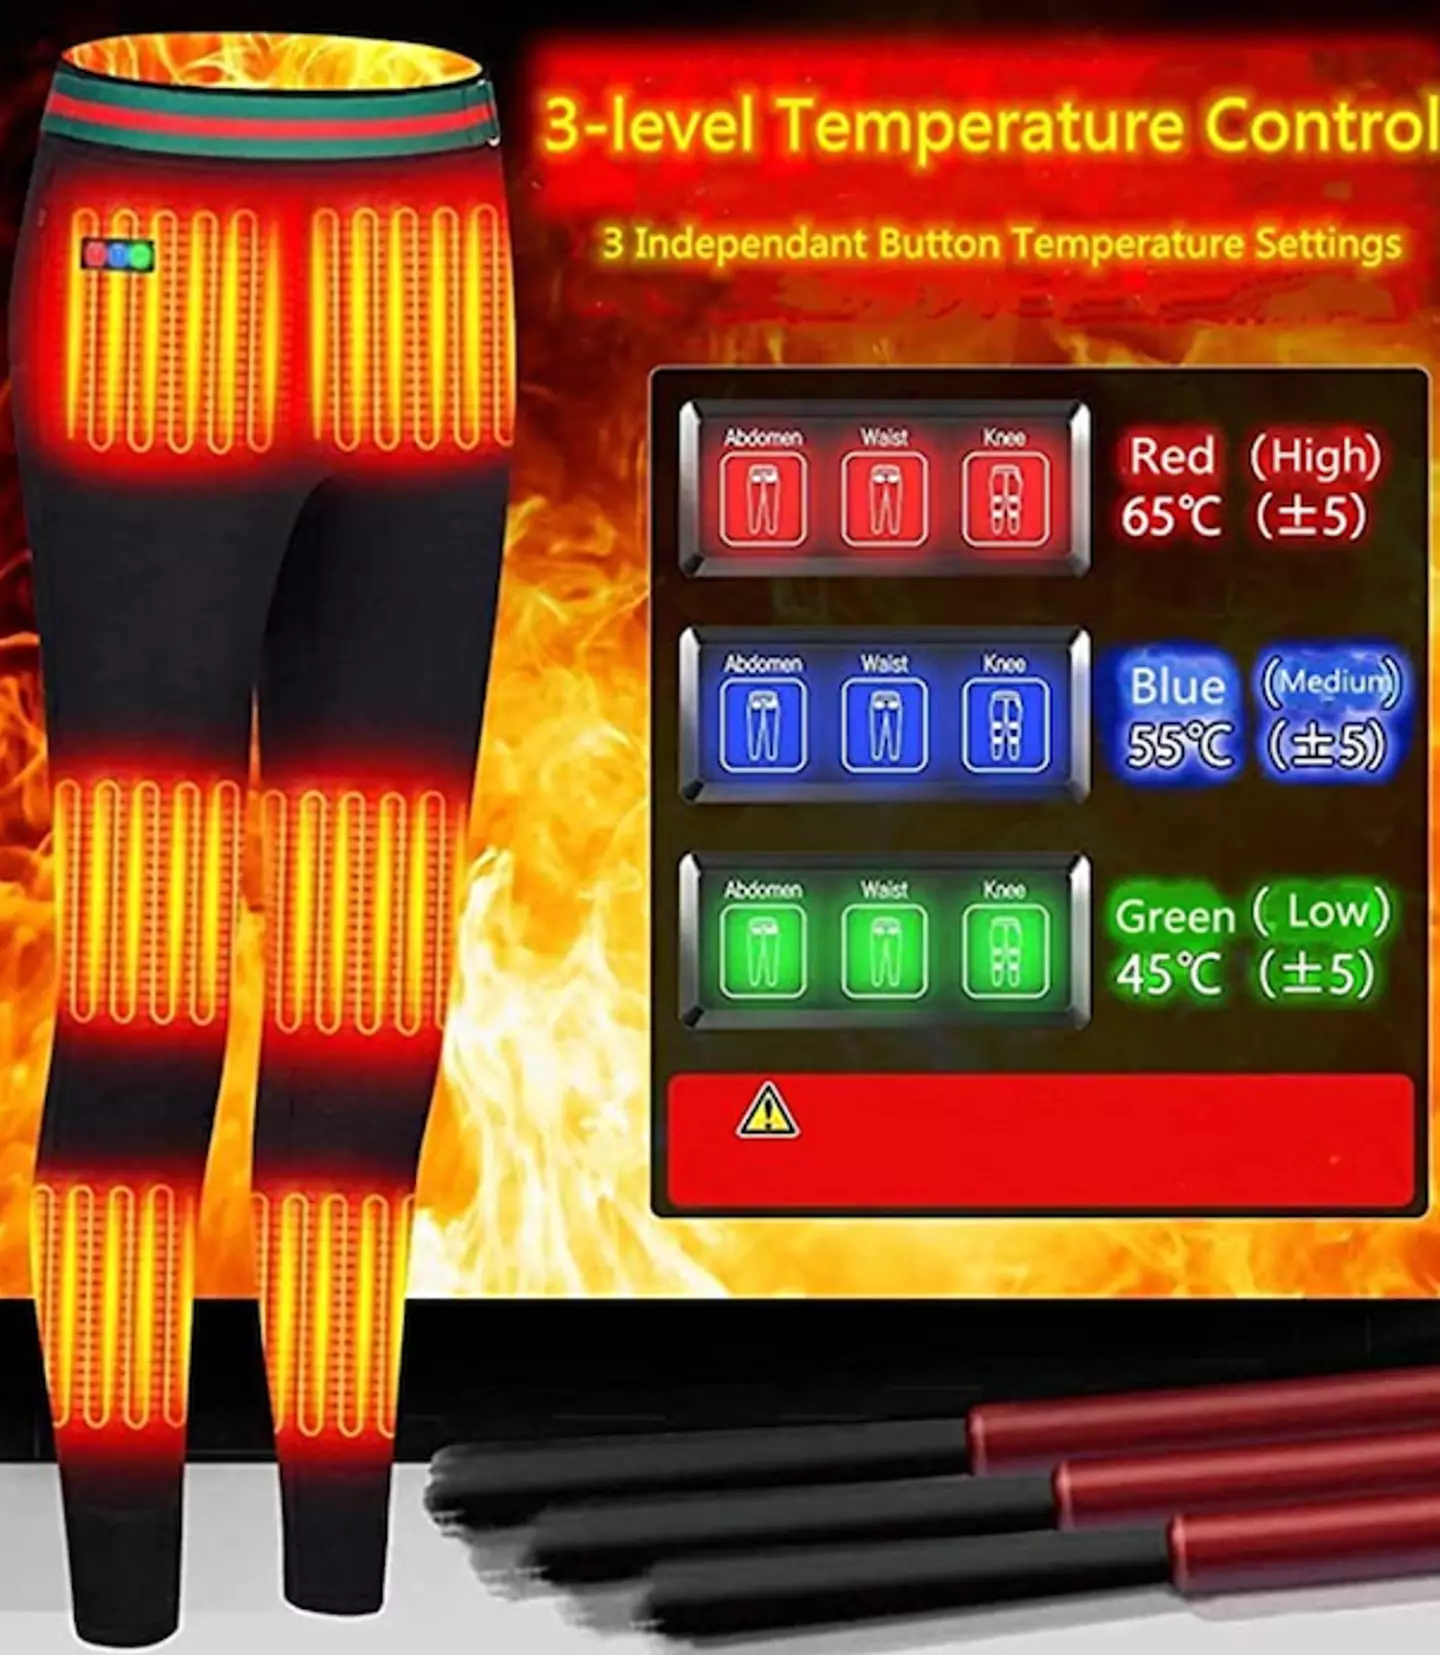 These USB heated leggings don't just keep you warm, but can relieve pain, promote metabolism, and promote blood circulation. (